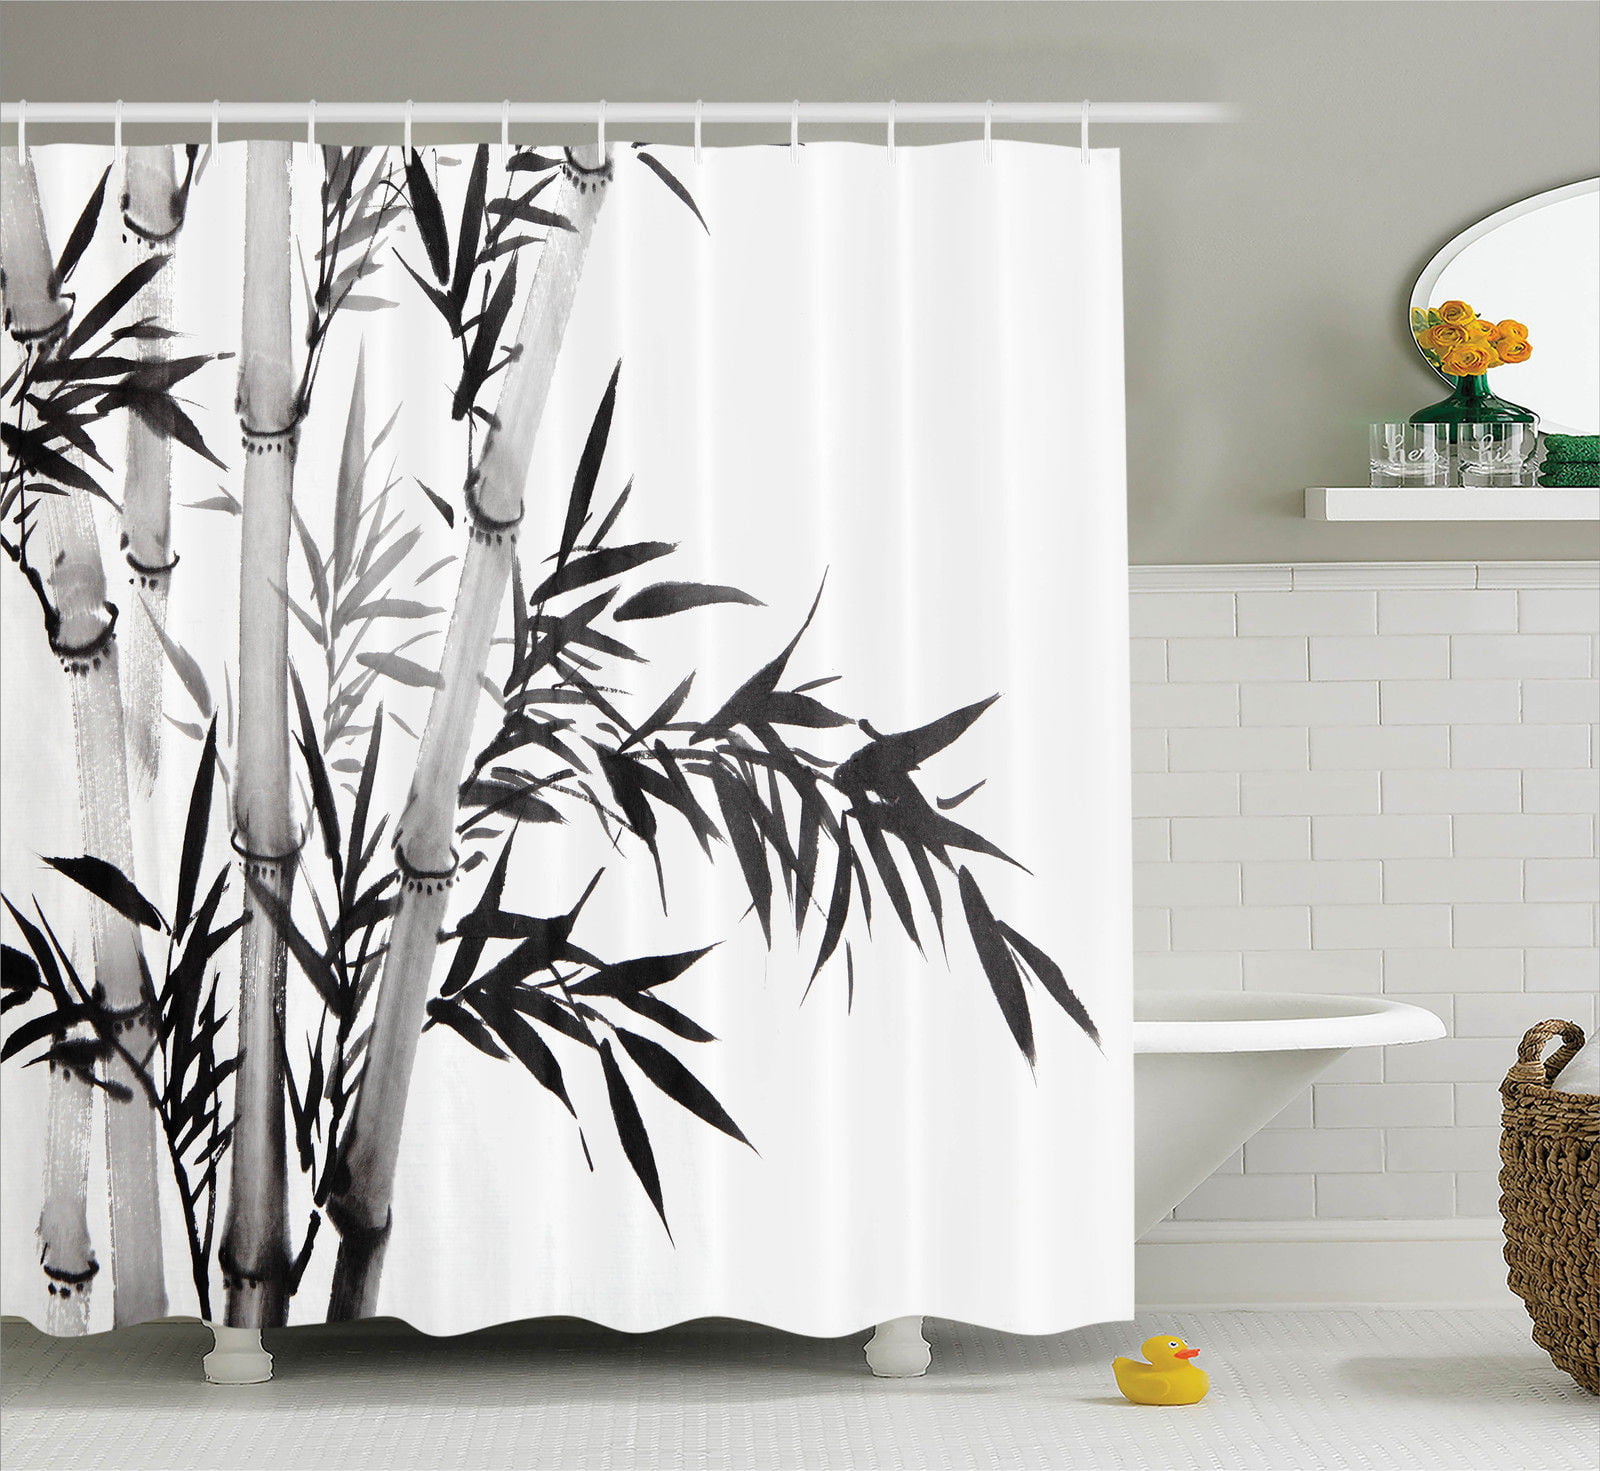 Polyester Fabric Shower Curtain Set Japanese Style Bamboo Leaves and Branches 